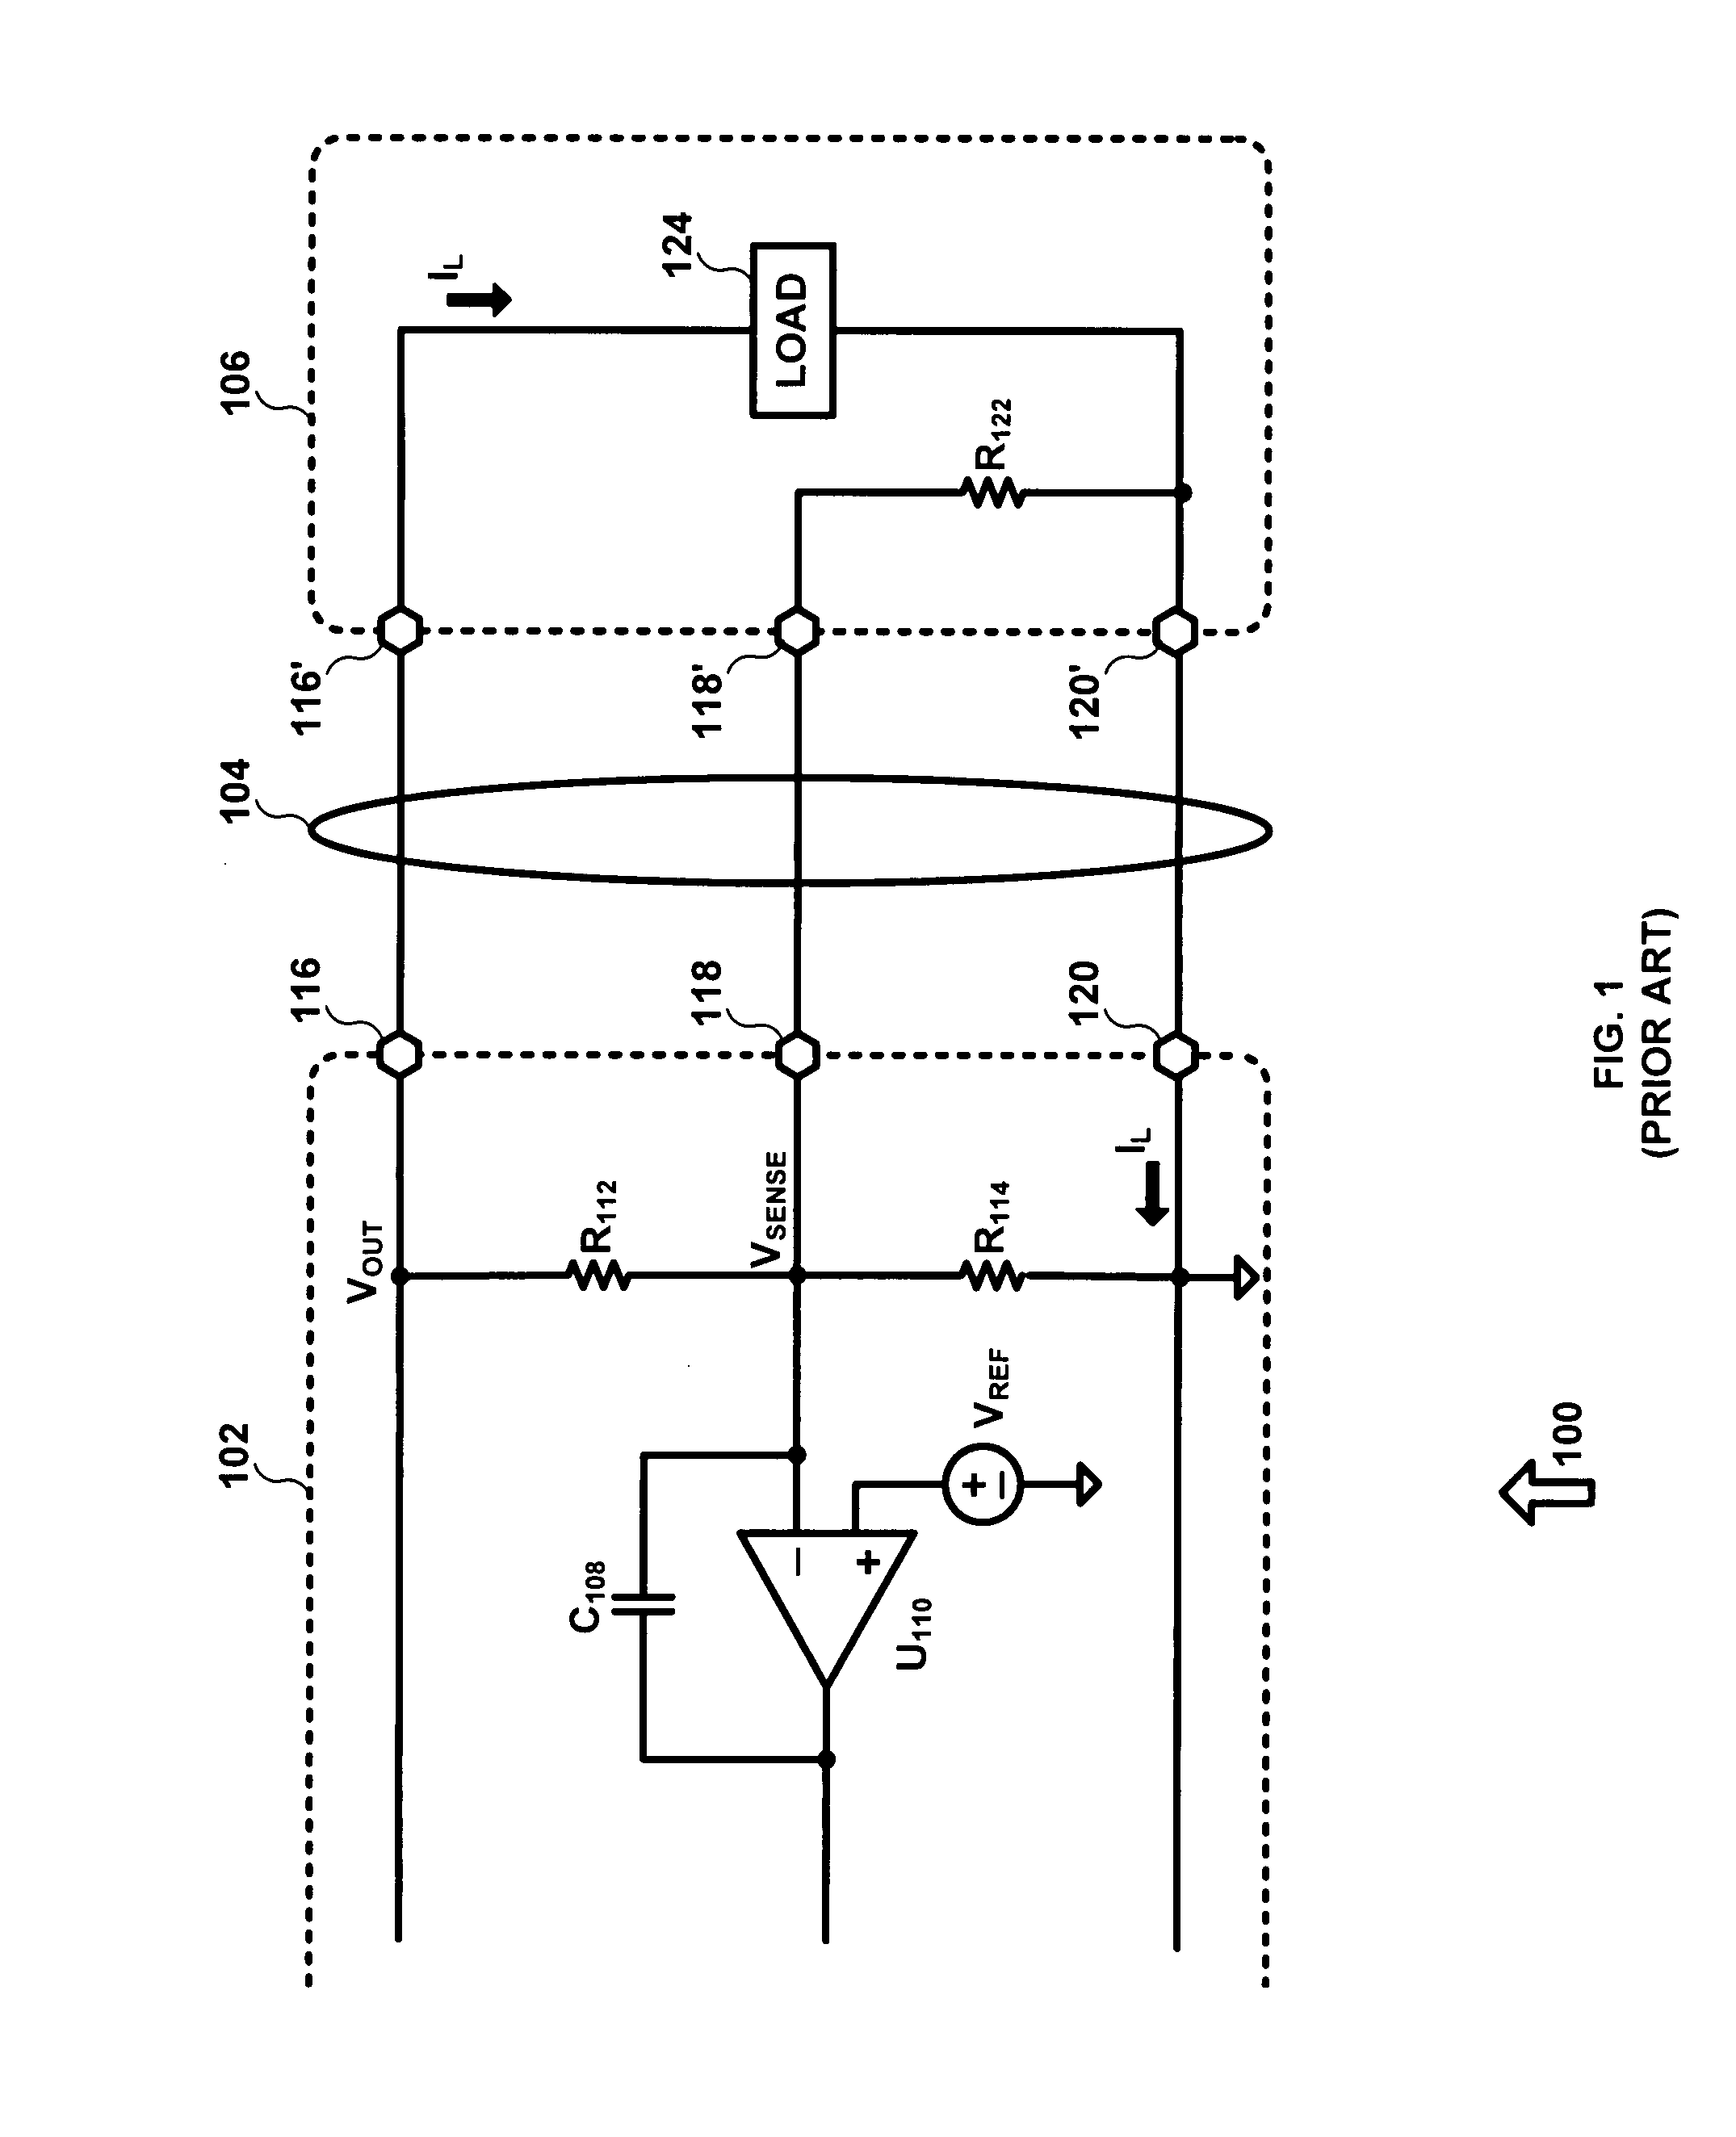 System and method for cable resistance cancellation